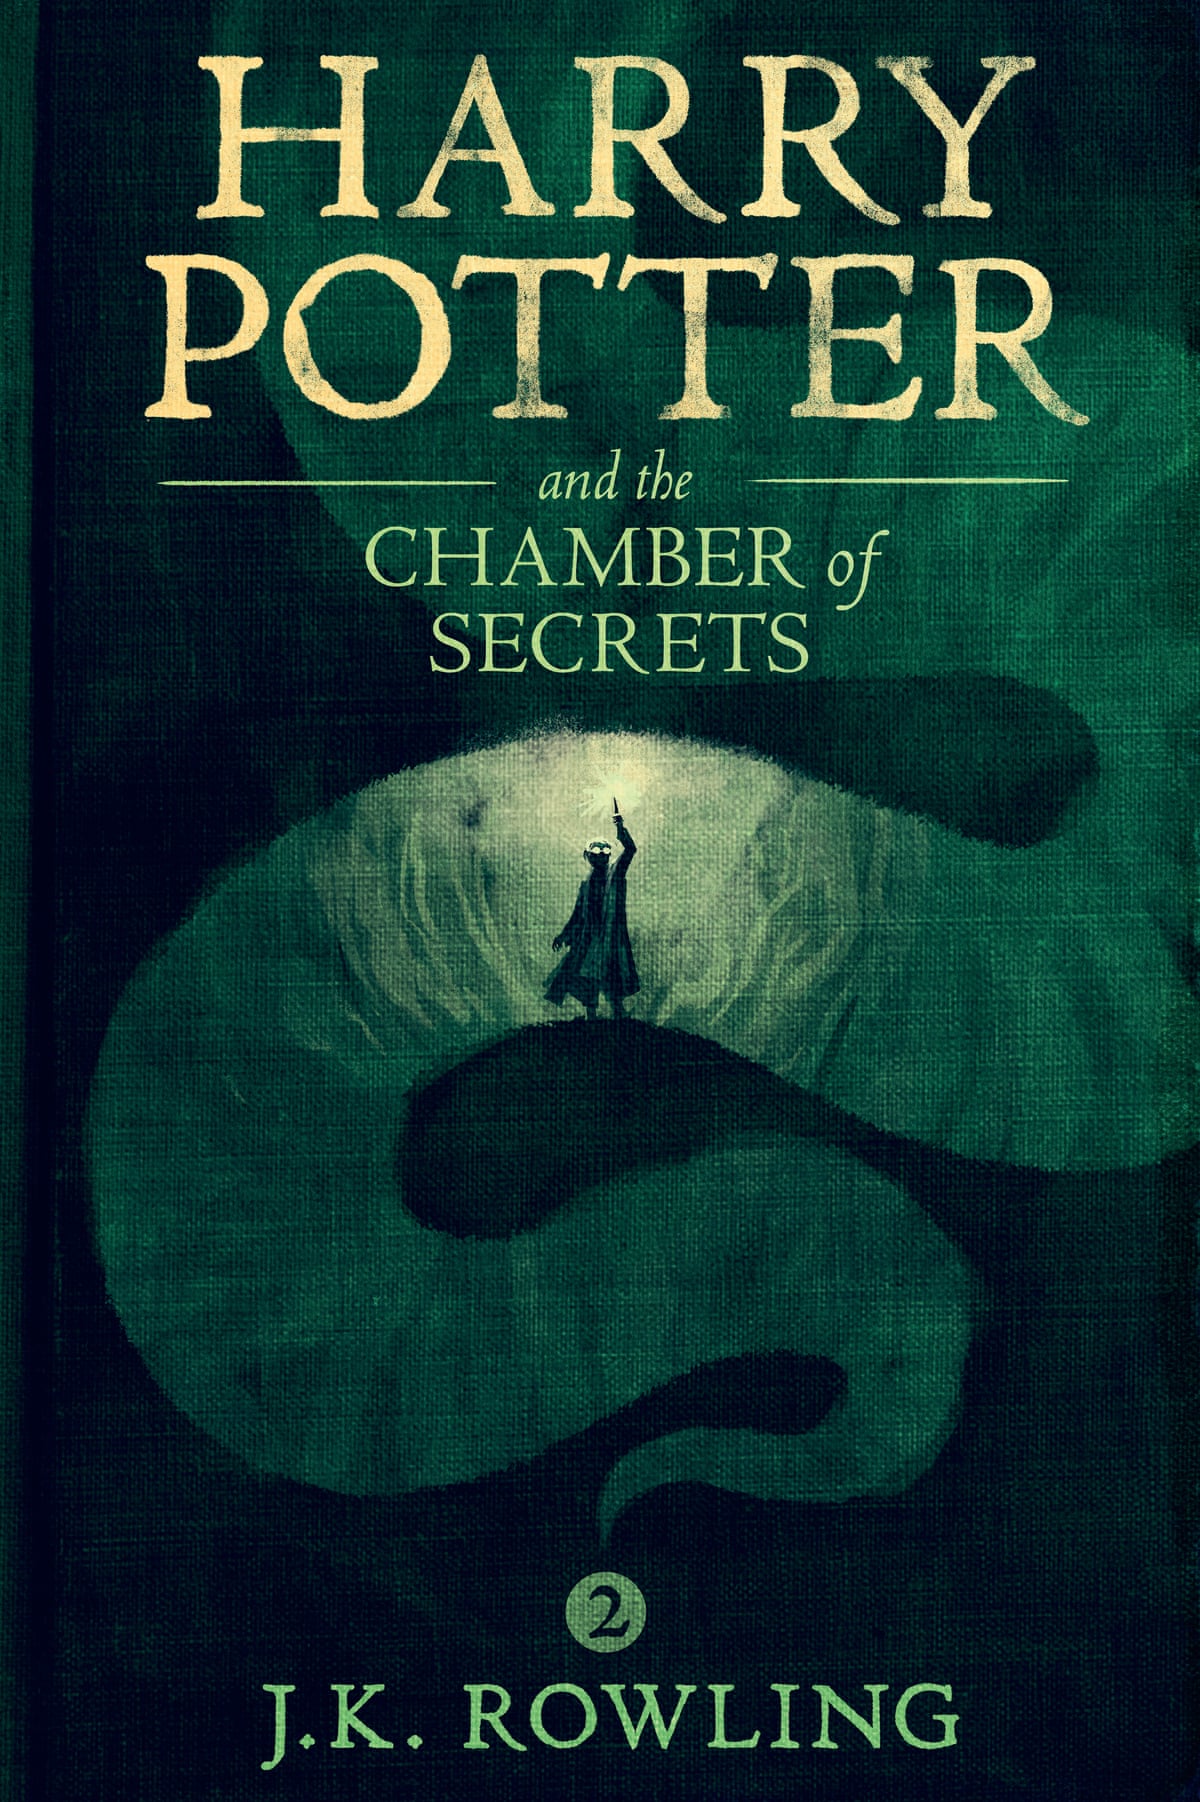 New Harry Potter ebook covers revealed! | Children's books | The Guardian